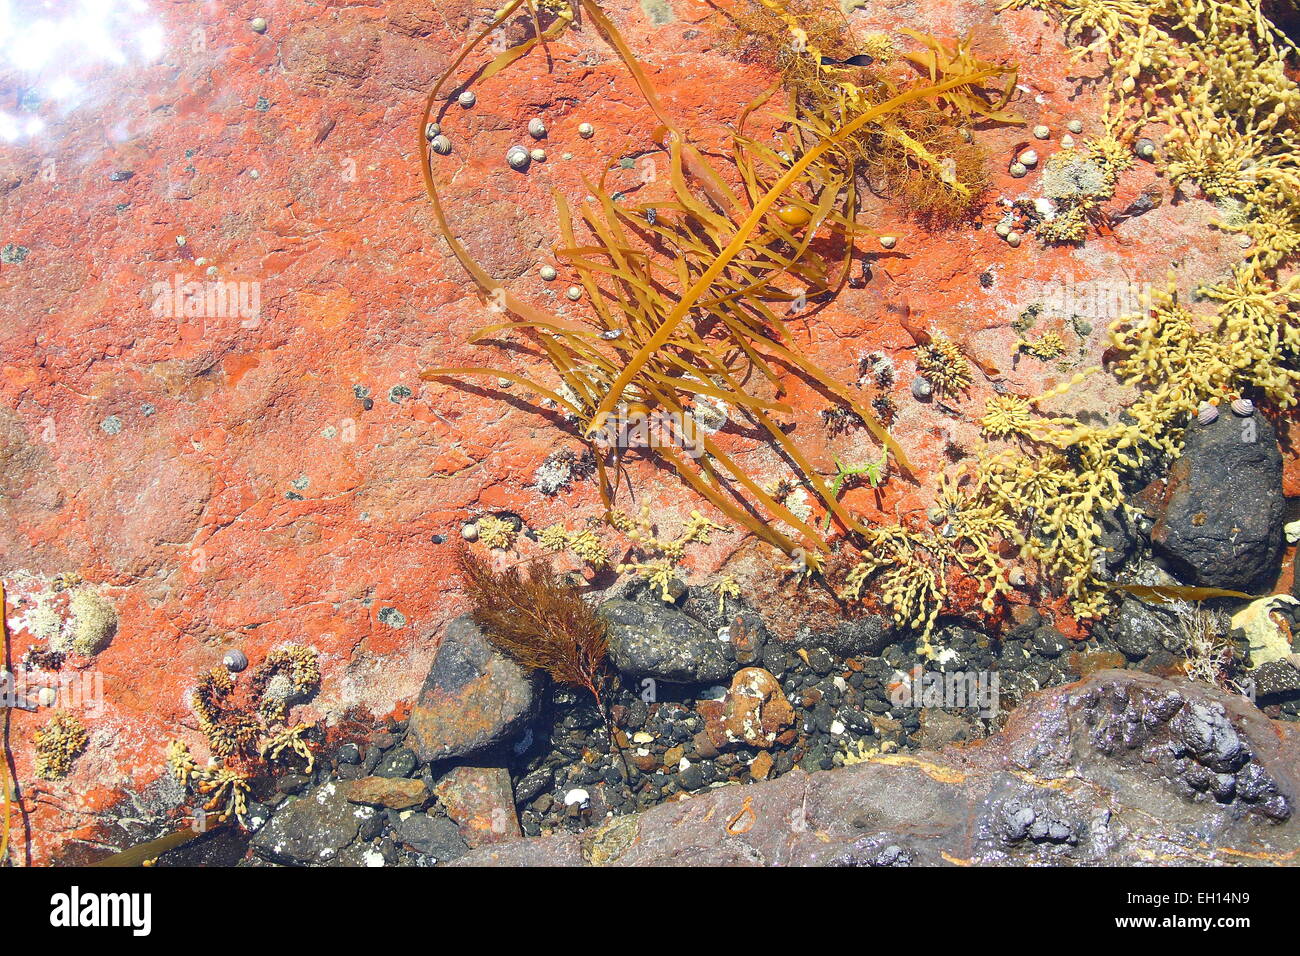 Sea plant and seaweed near shallow water at the beach Stock Photo